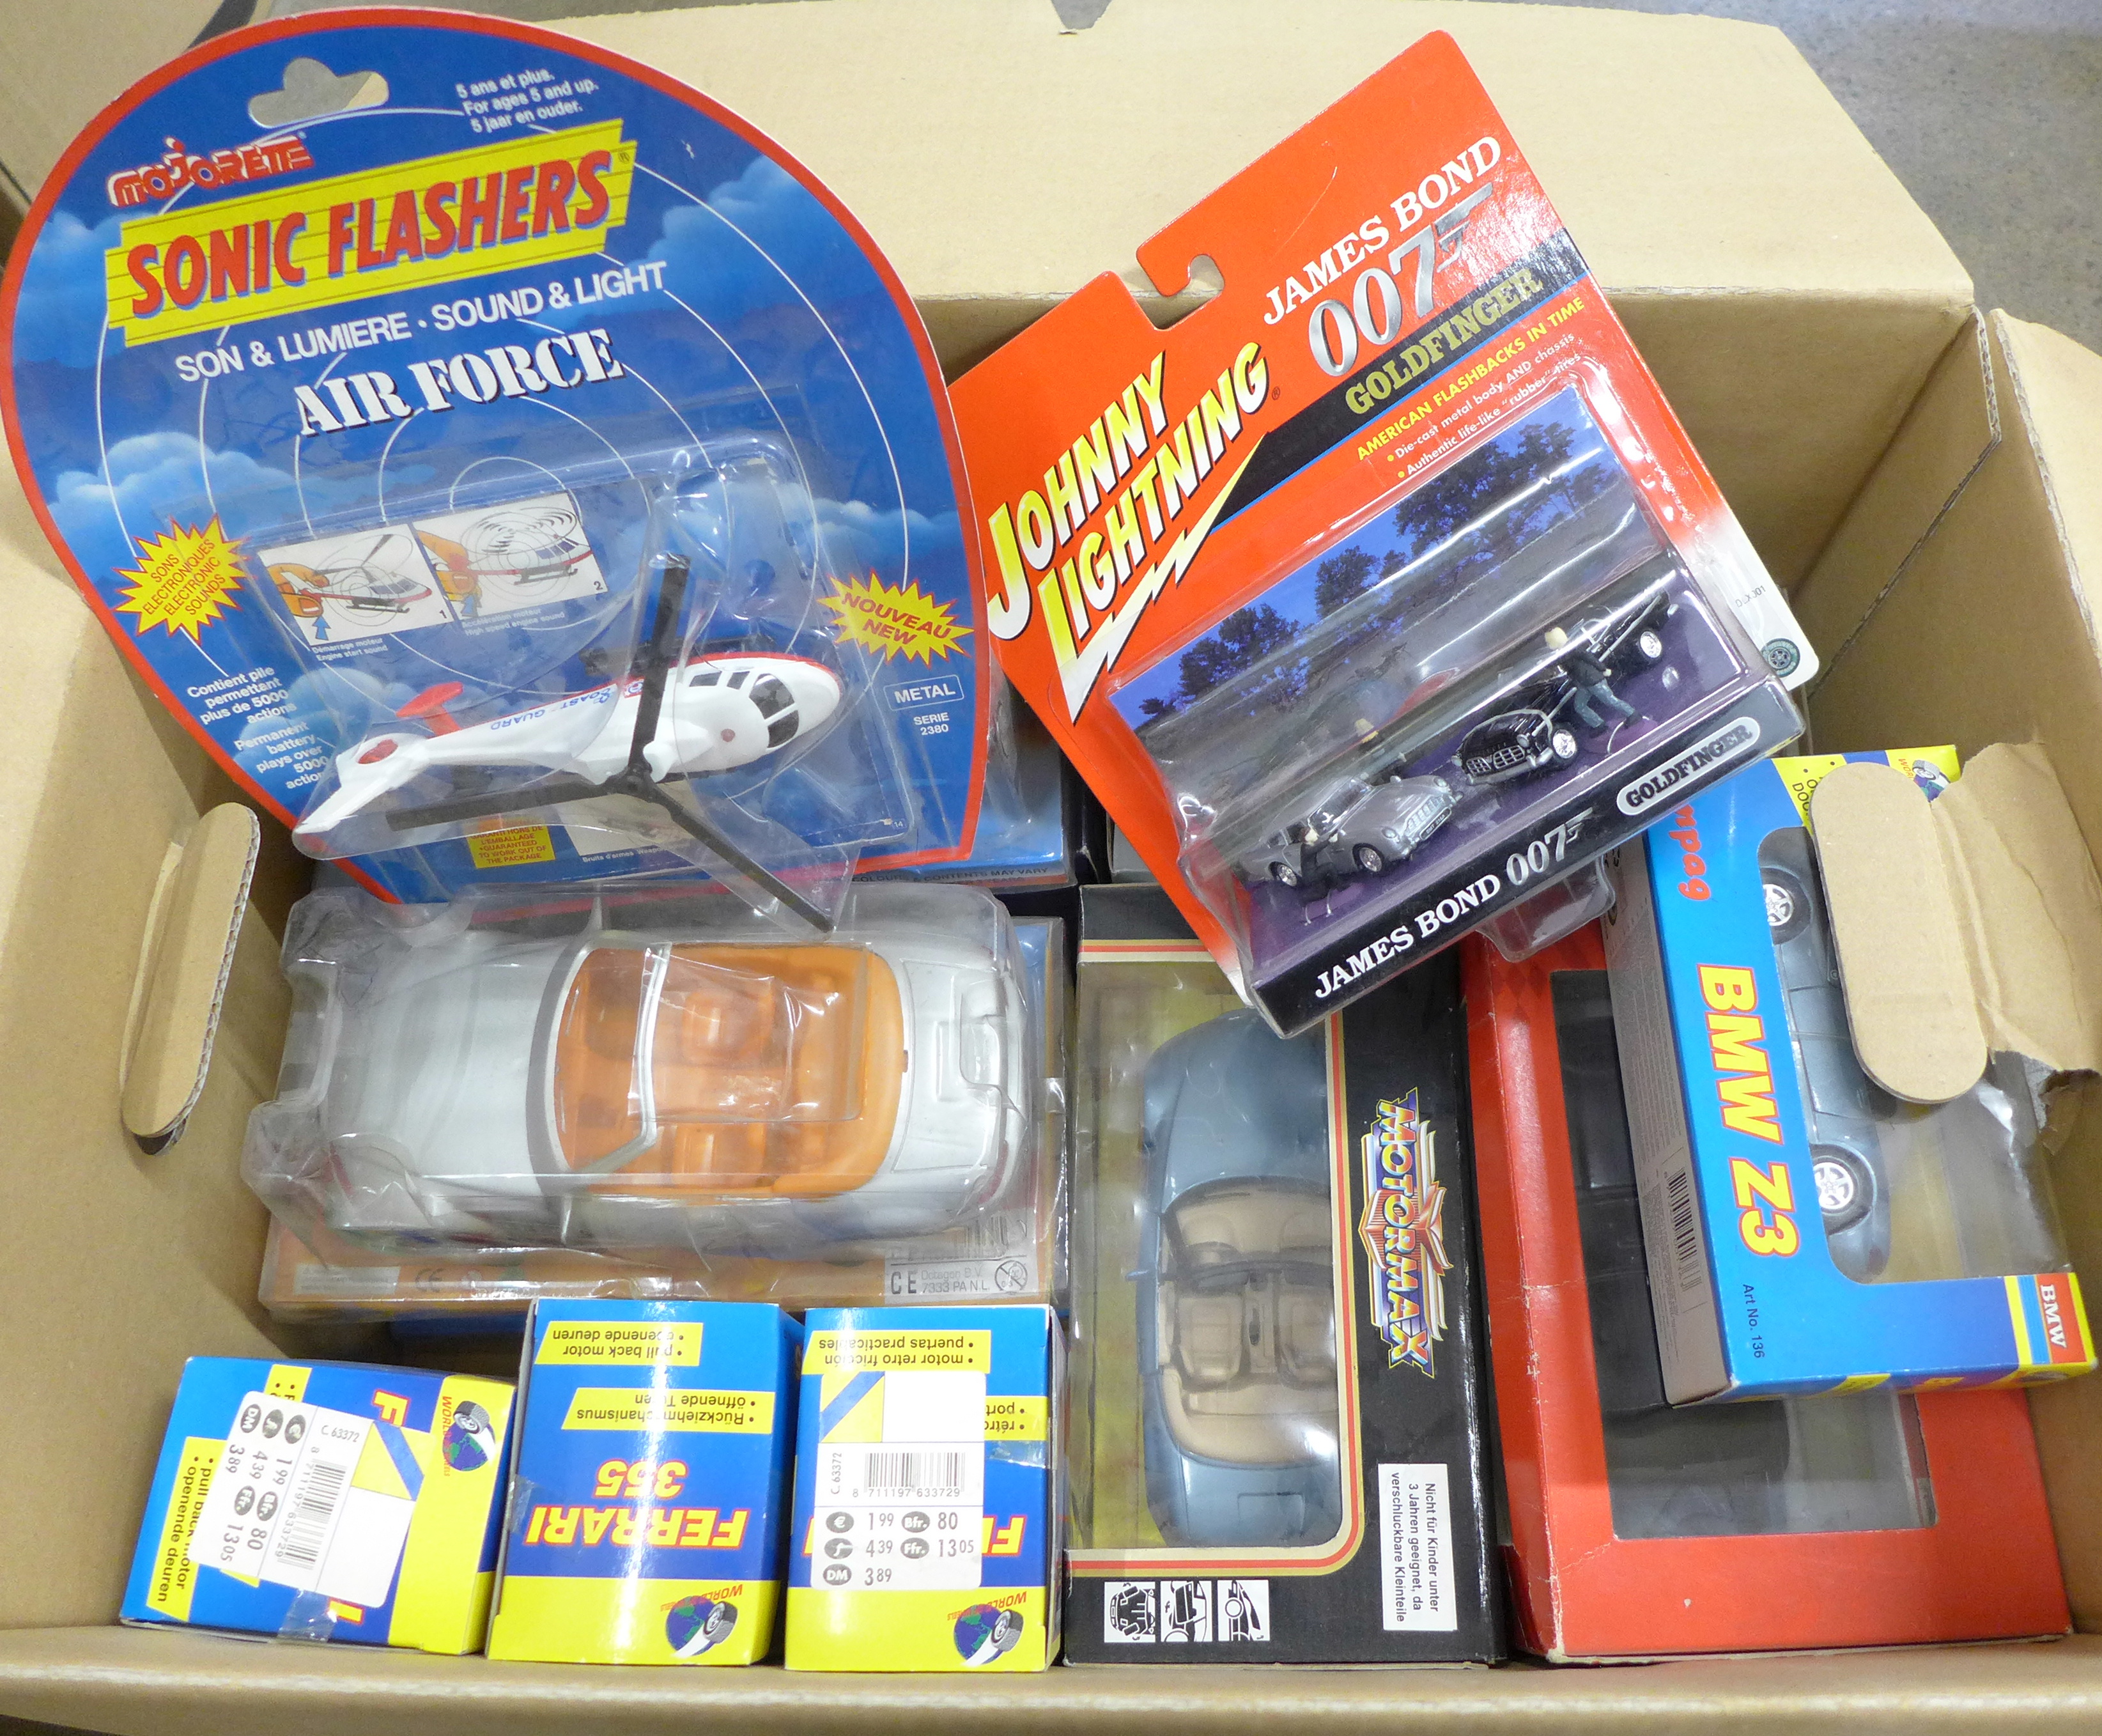 A collection of model sports cars, boxed